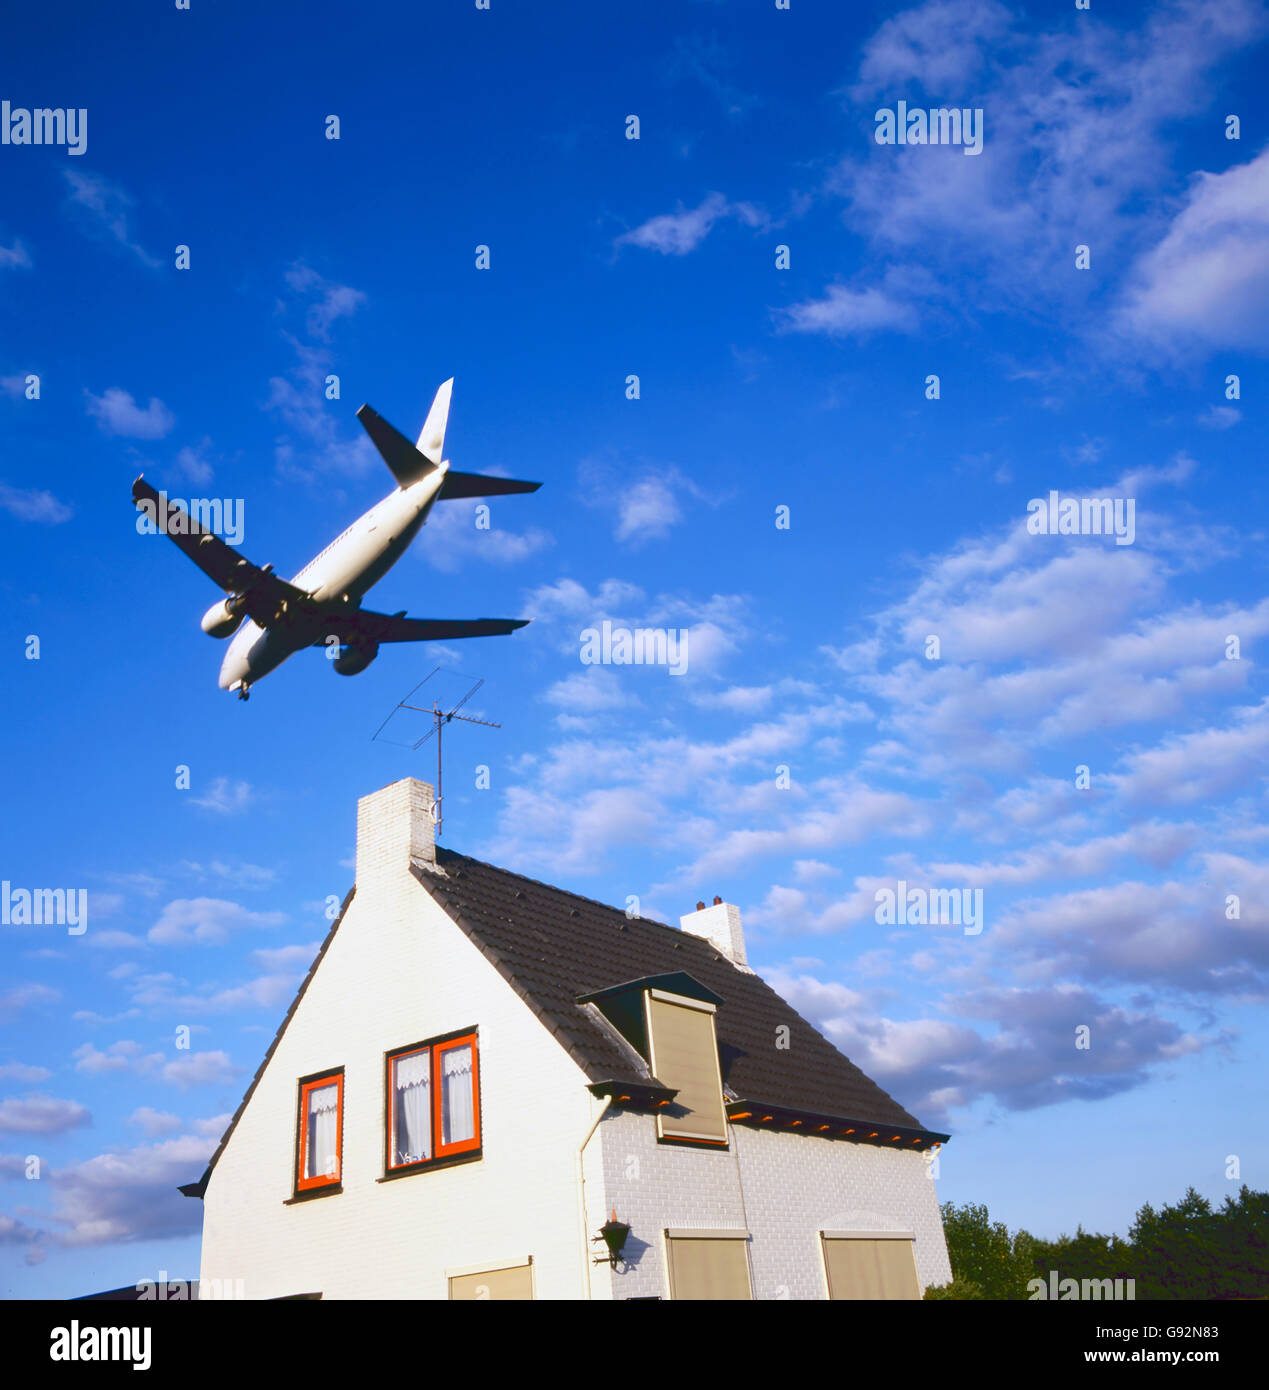 large jet aircraft on landing approach over suburban housing Stock Photo